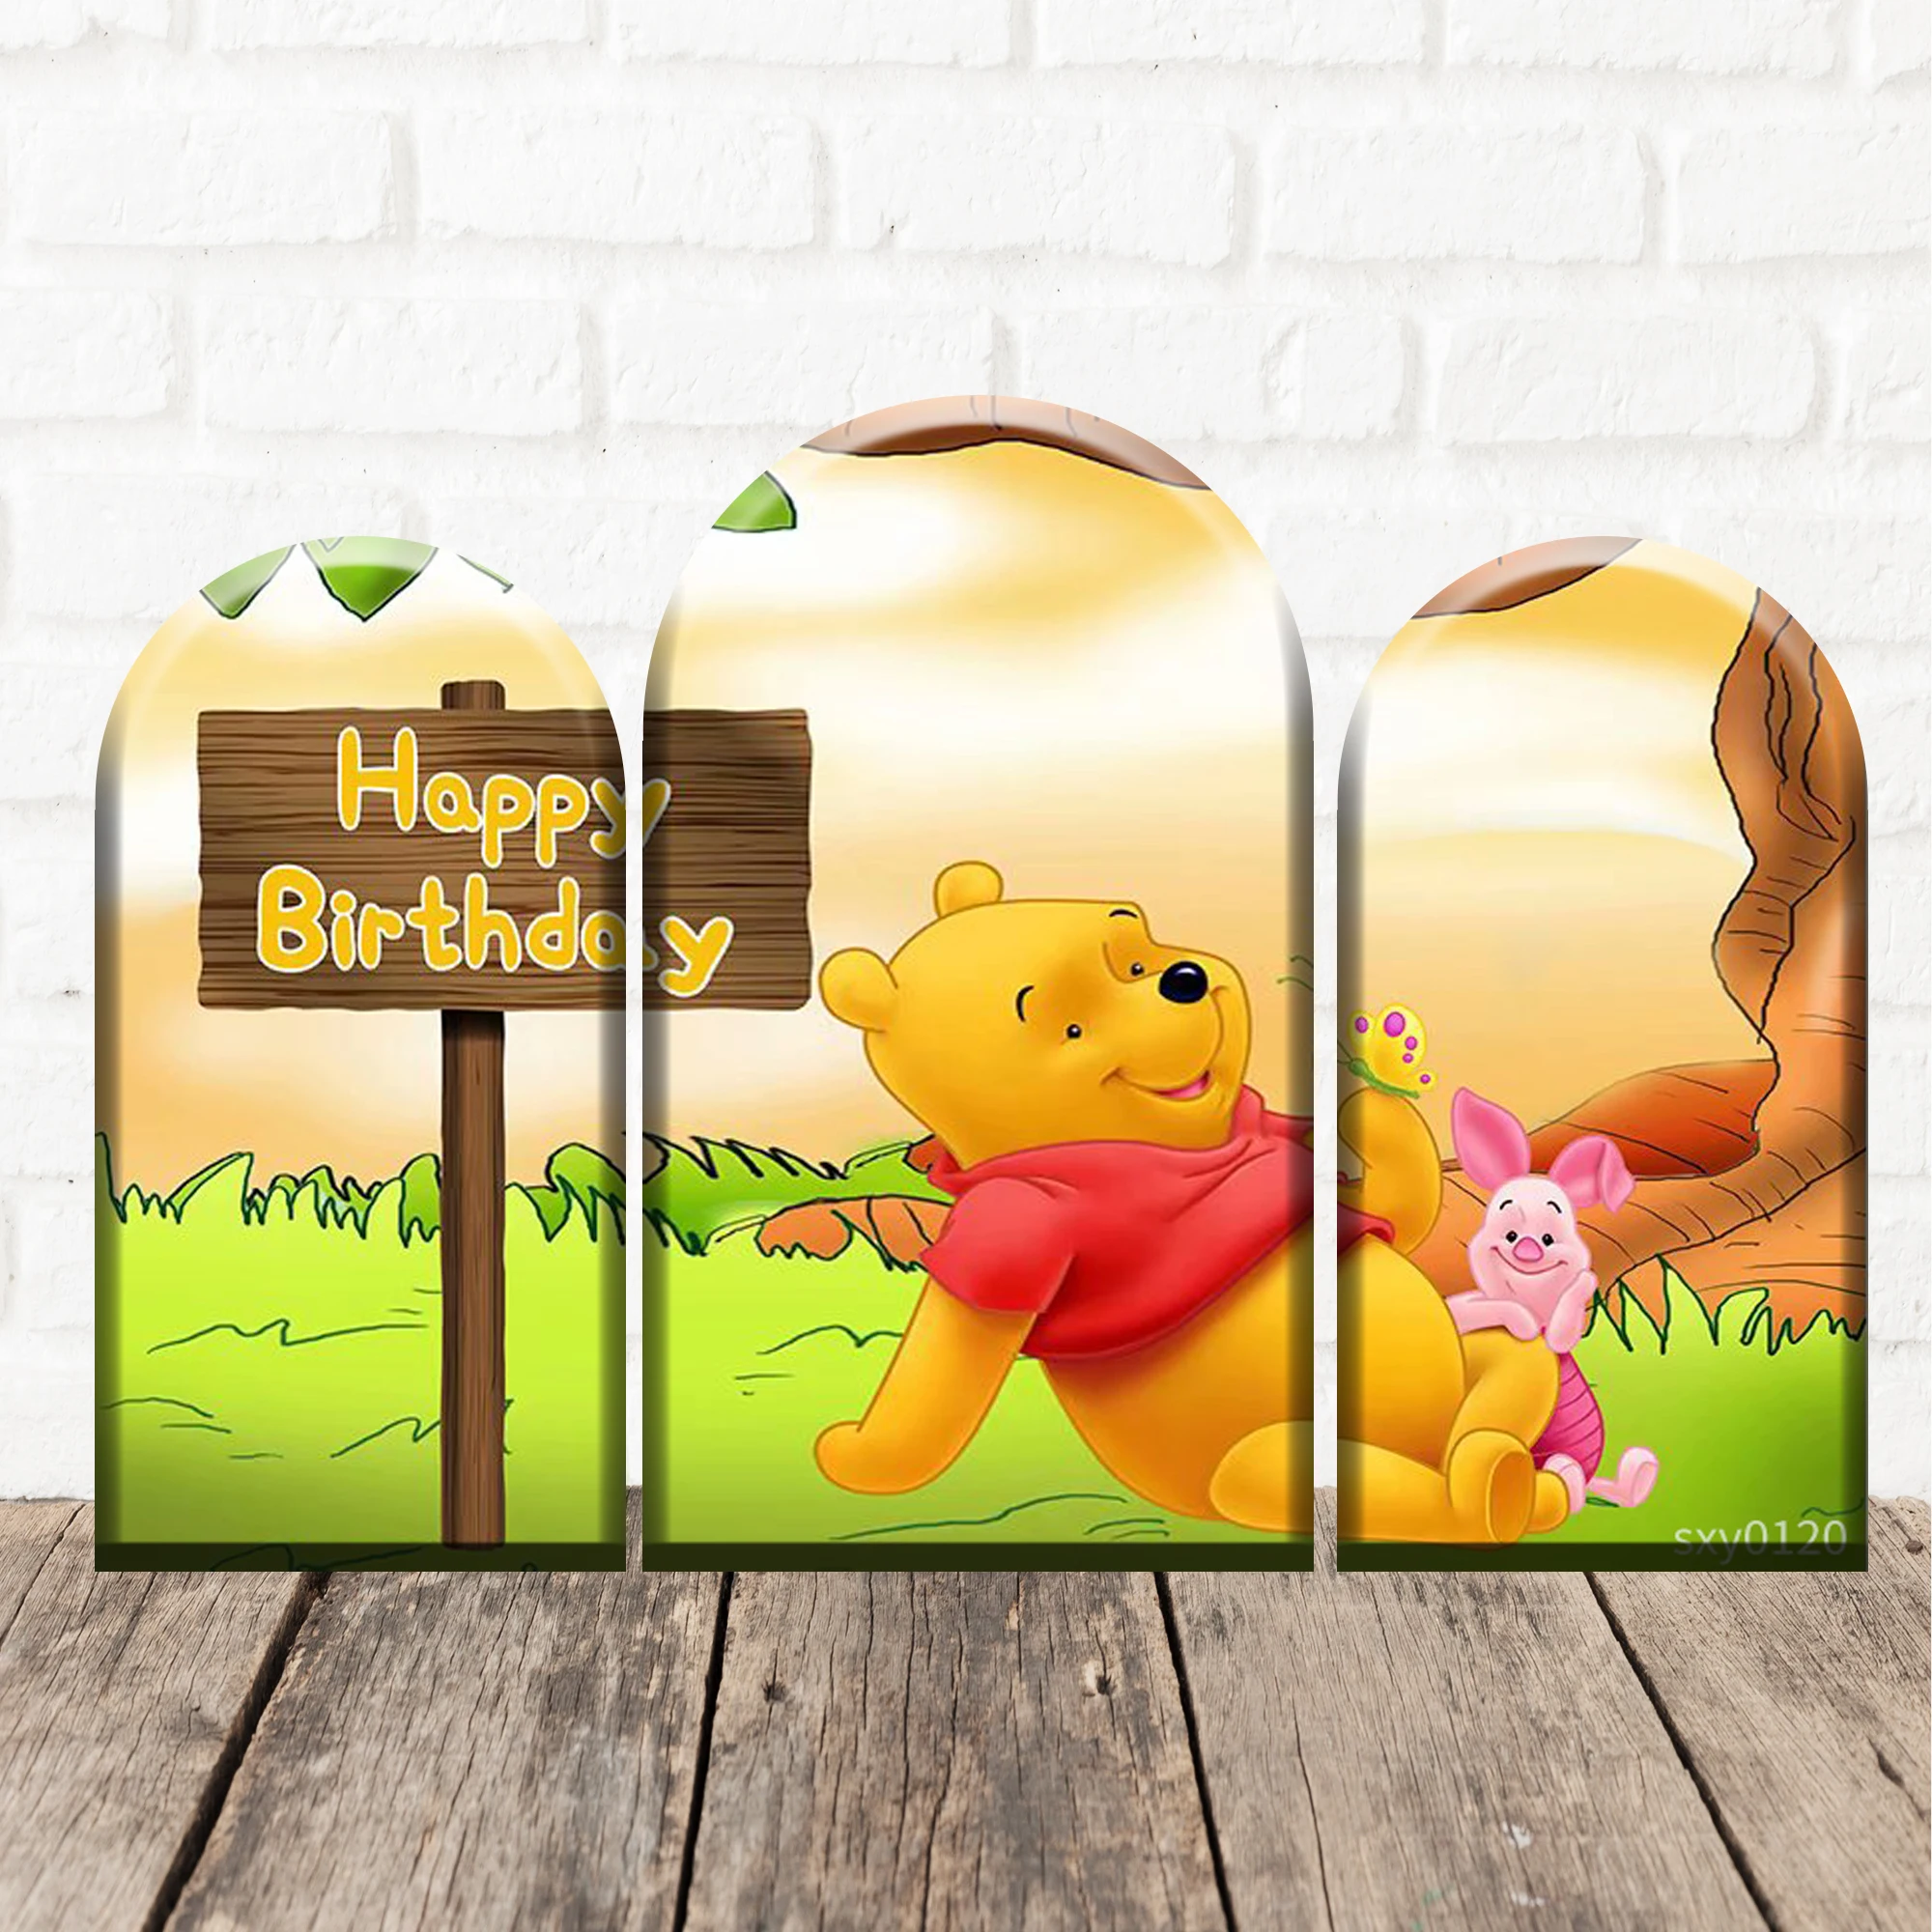 Winnie The Pooh Arch Backdrops Piglet Background Birthday Party Decoration Disney Banner Photo Shoot Doubleside Elastic Fabric